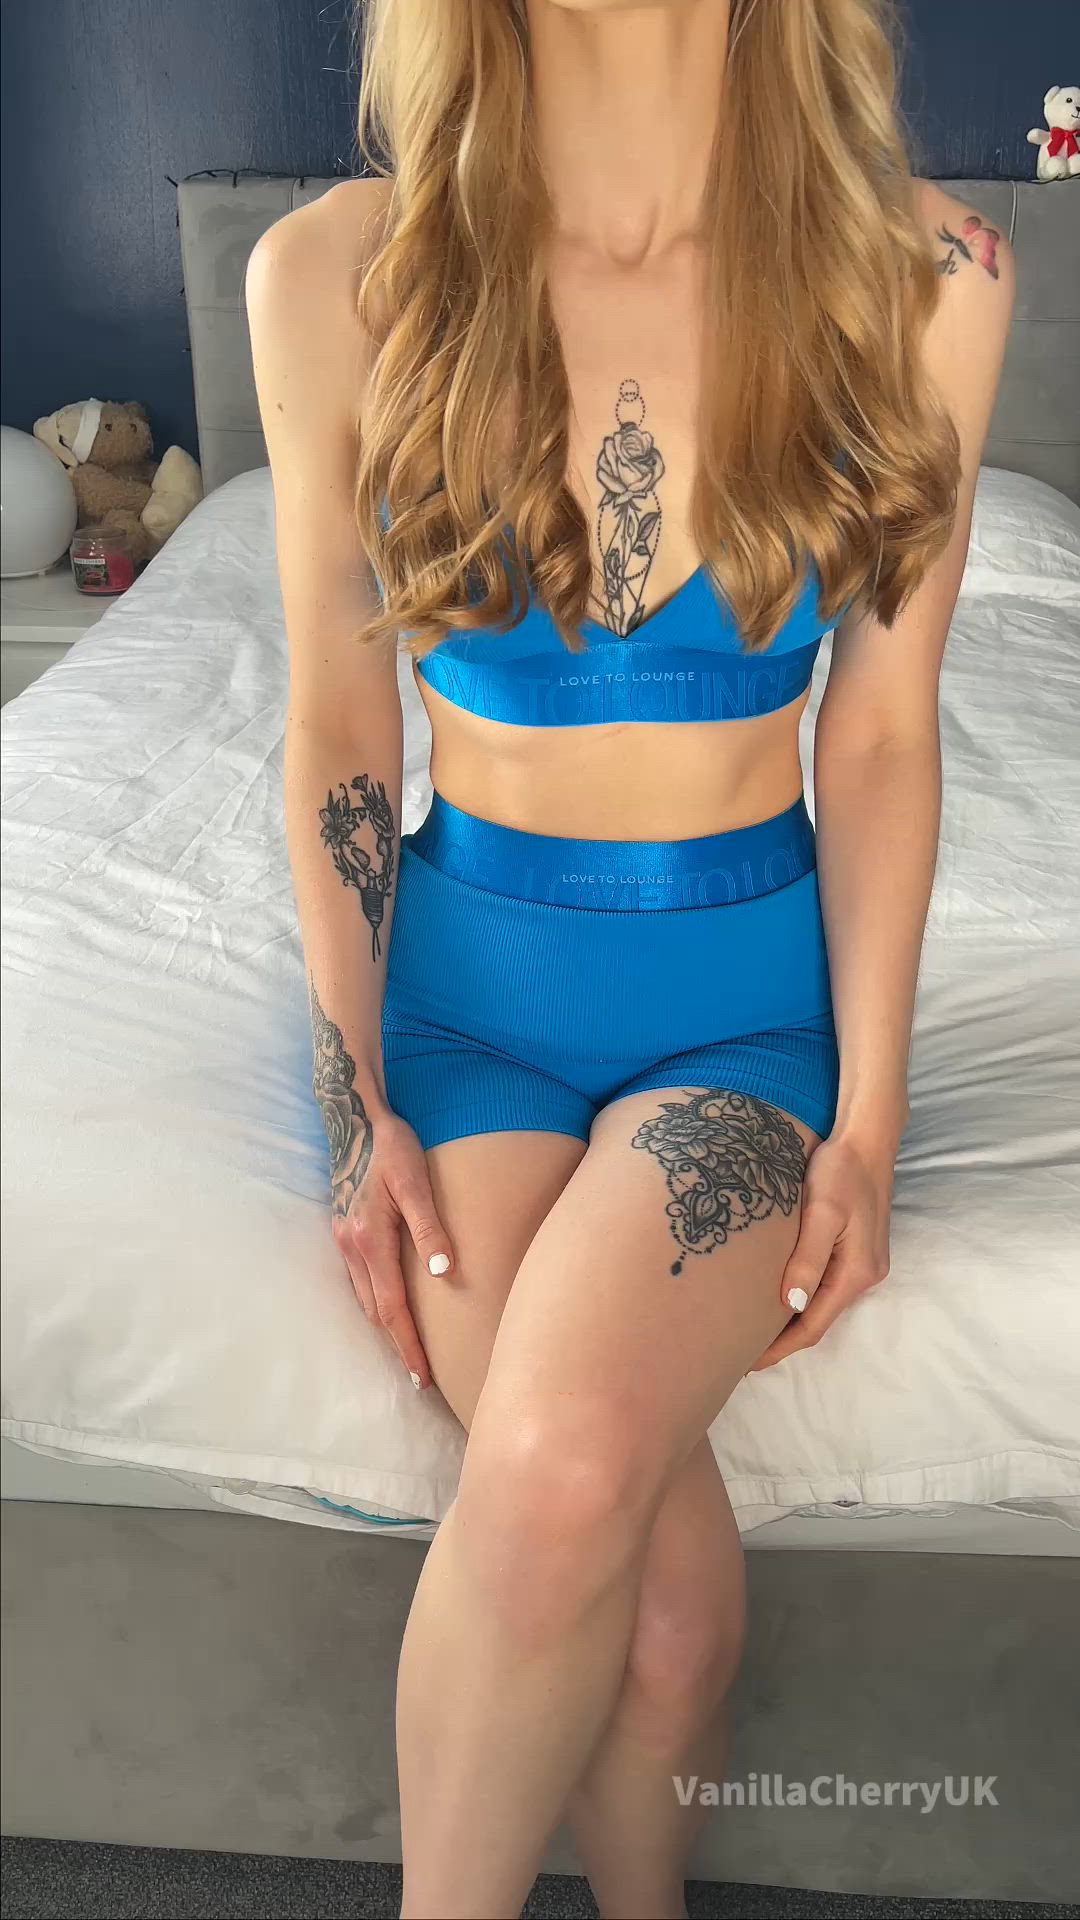 Amateur porn video with onlyfans model VanillaCherryUK <strong>@vanillacherryuk</strong>